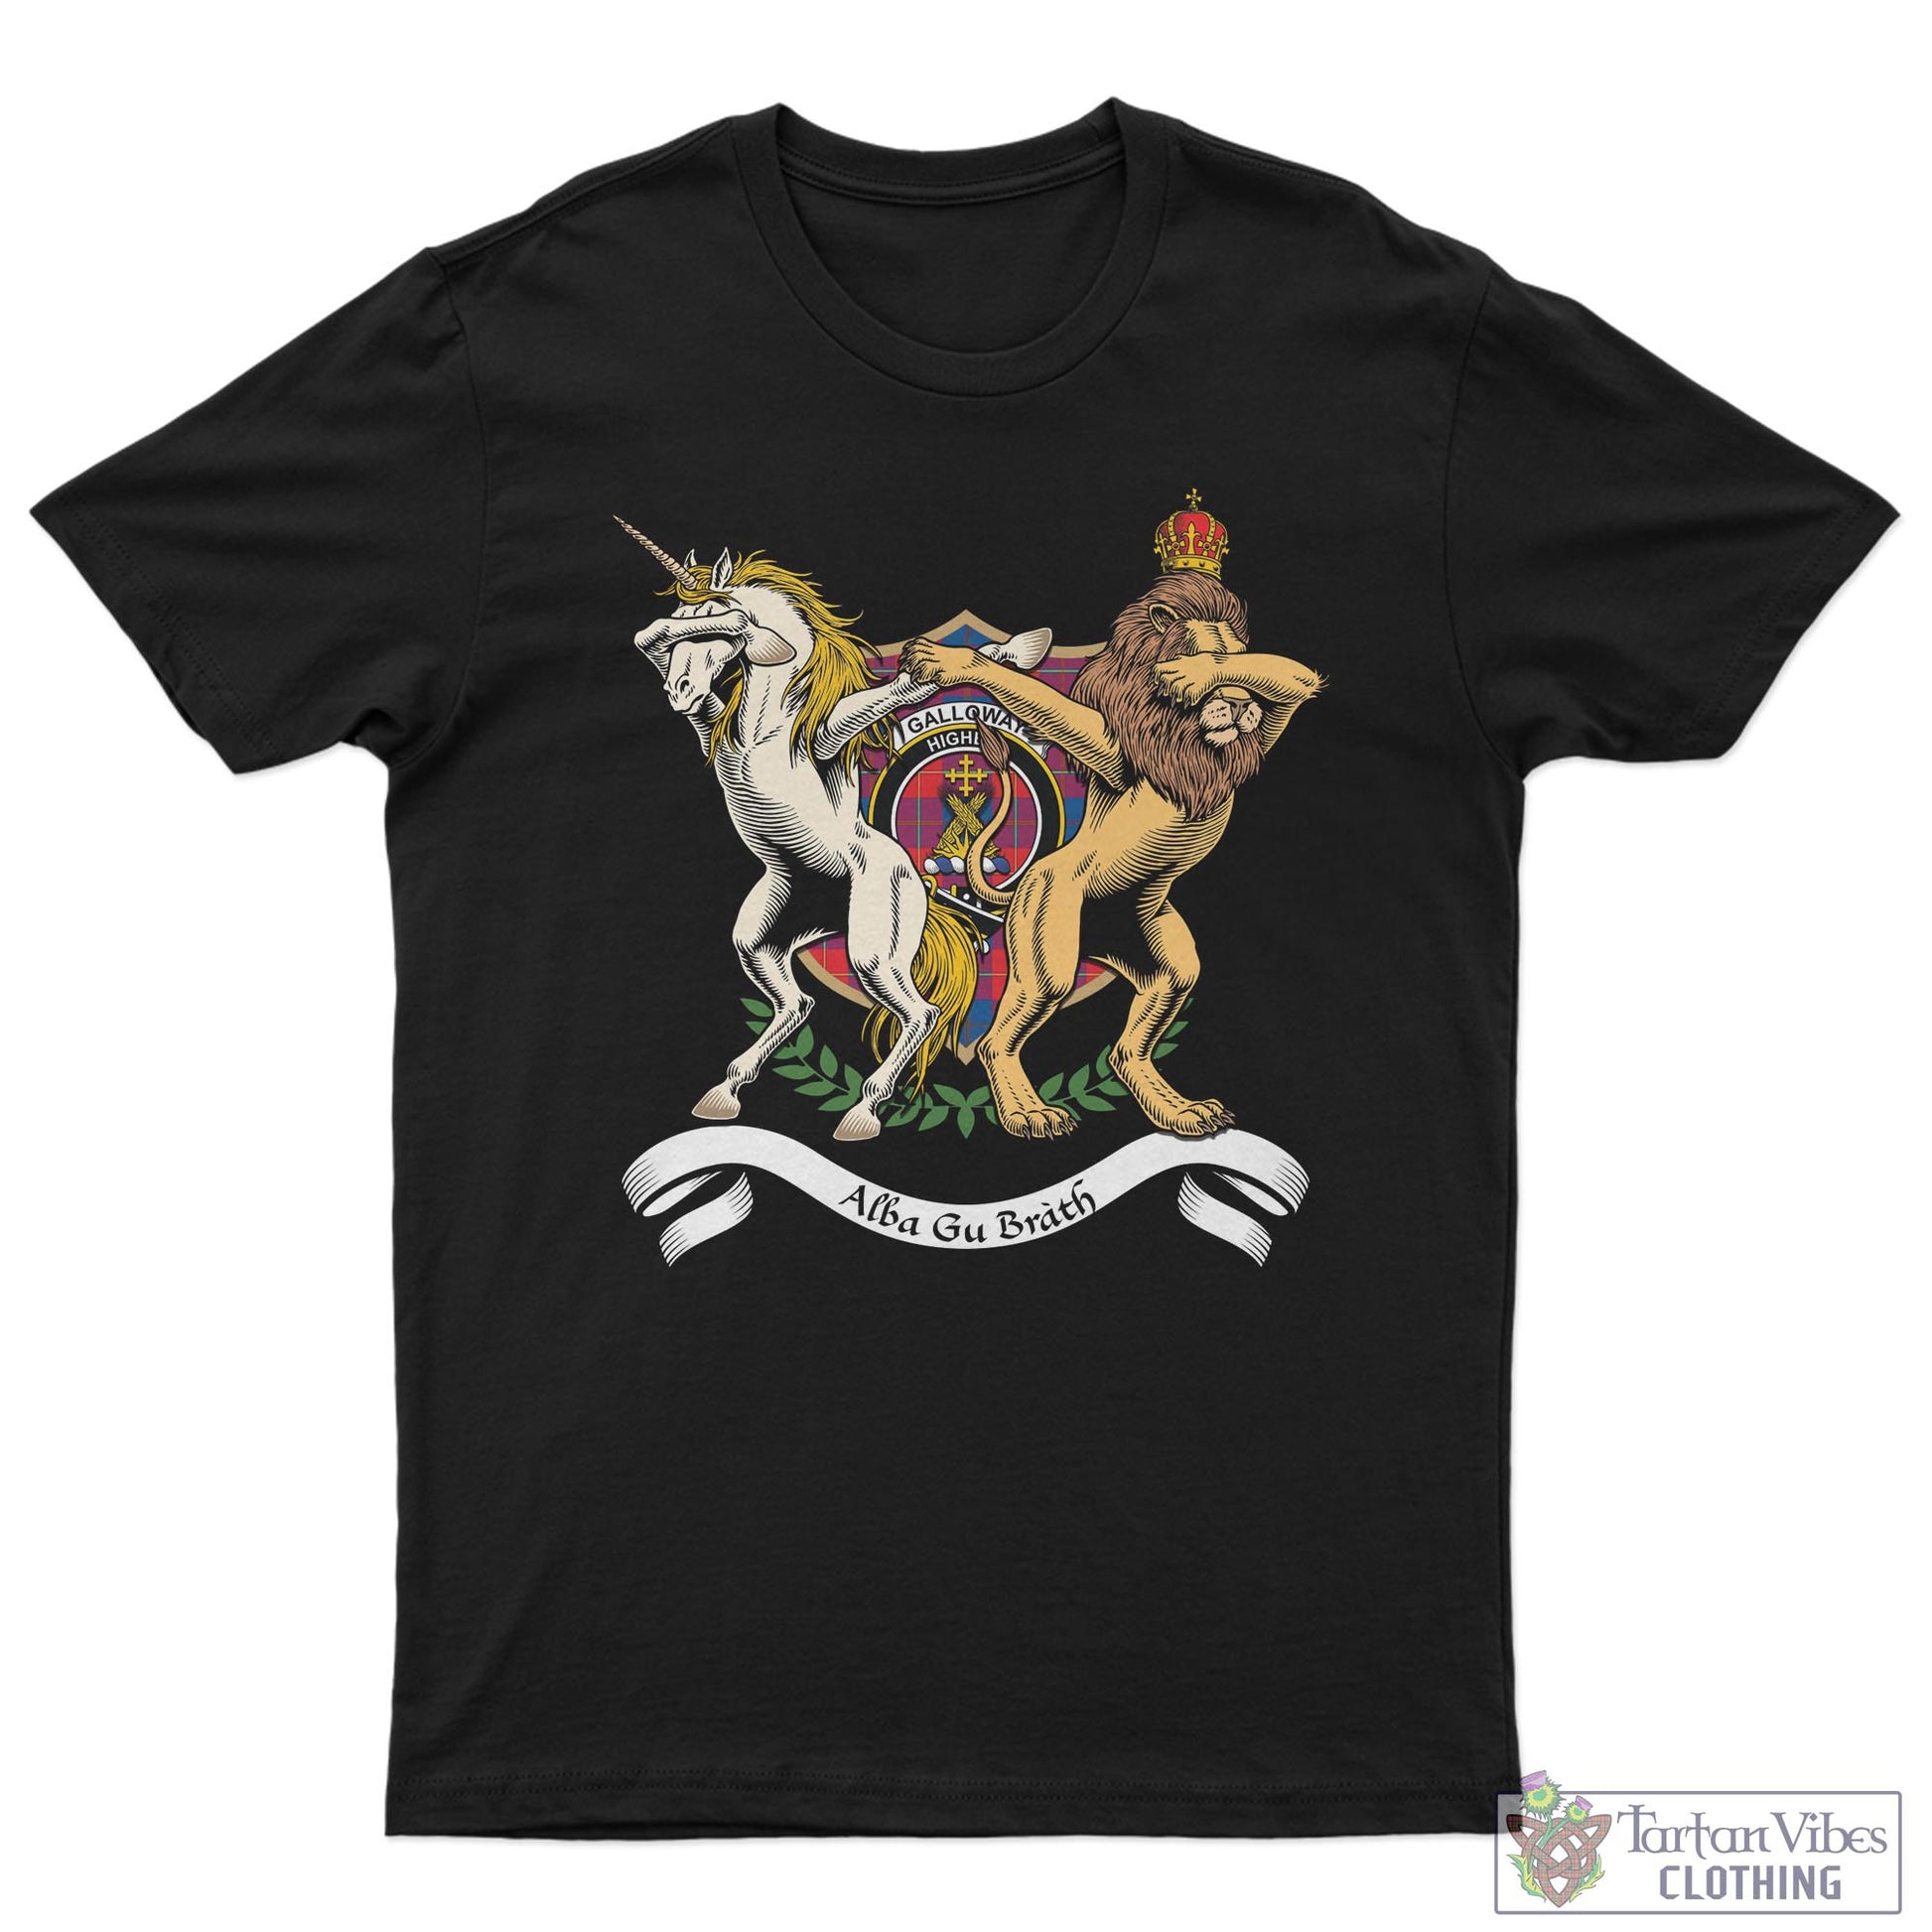 Tartan Vibes Clothing Galloway Red Family Crest Cotton Men's T-Shirt with Scotland Royal Coat Of Arm Funny Style